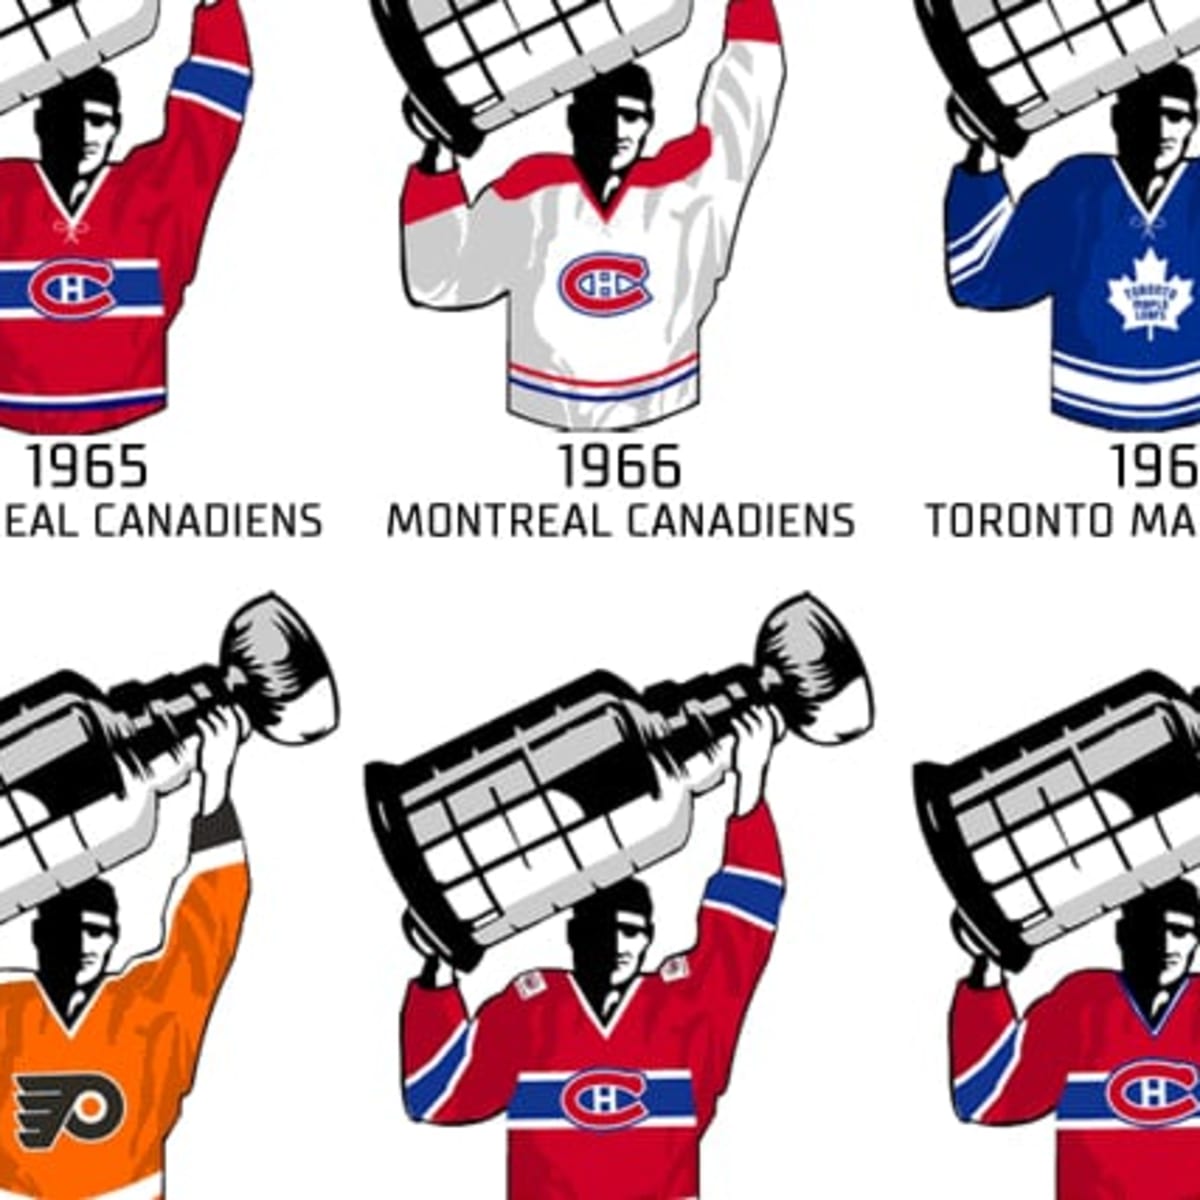 Graphic: NHL jerseys worn by all Stanley Cup clinching teams